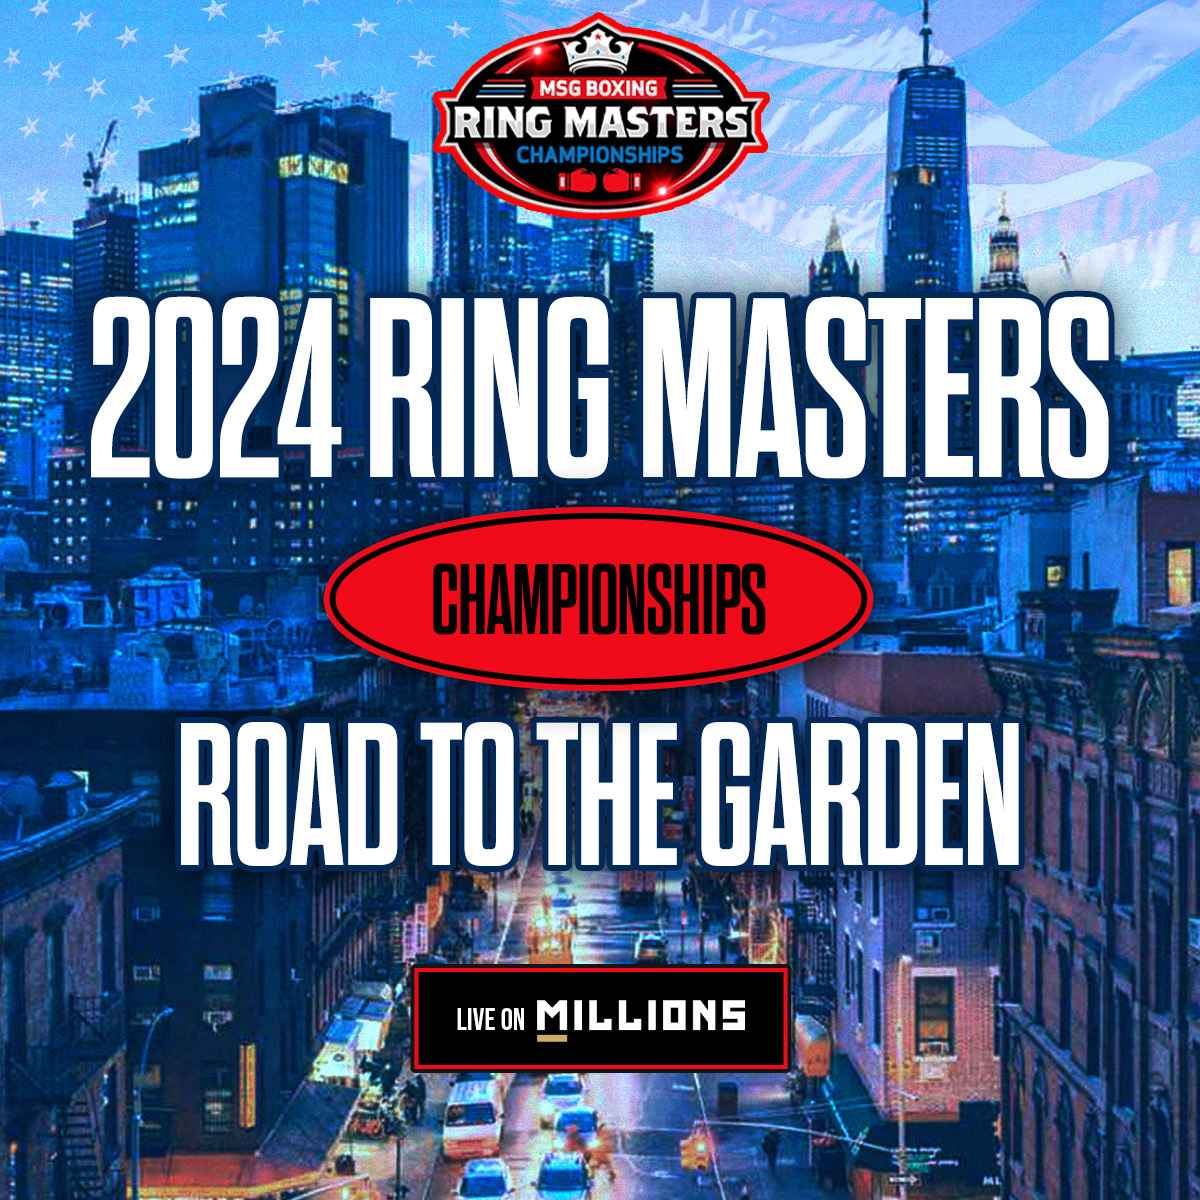 Ring Masters Road to the Garden Live from Knights of Columbus! MILLIONS